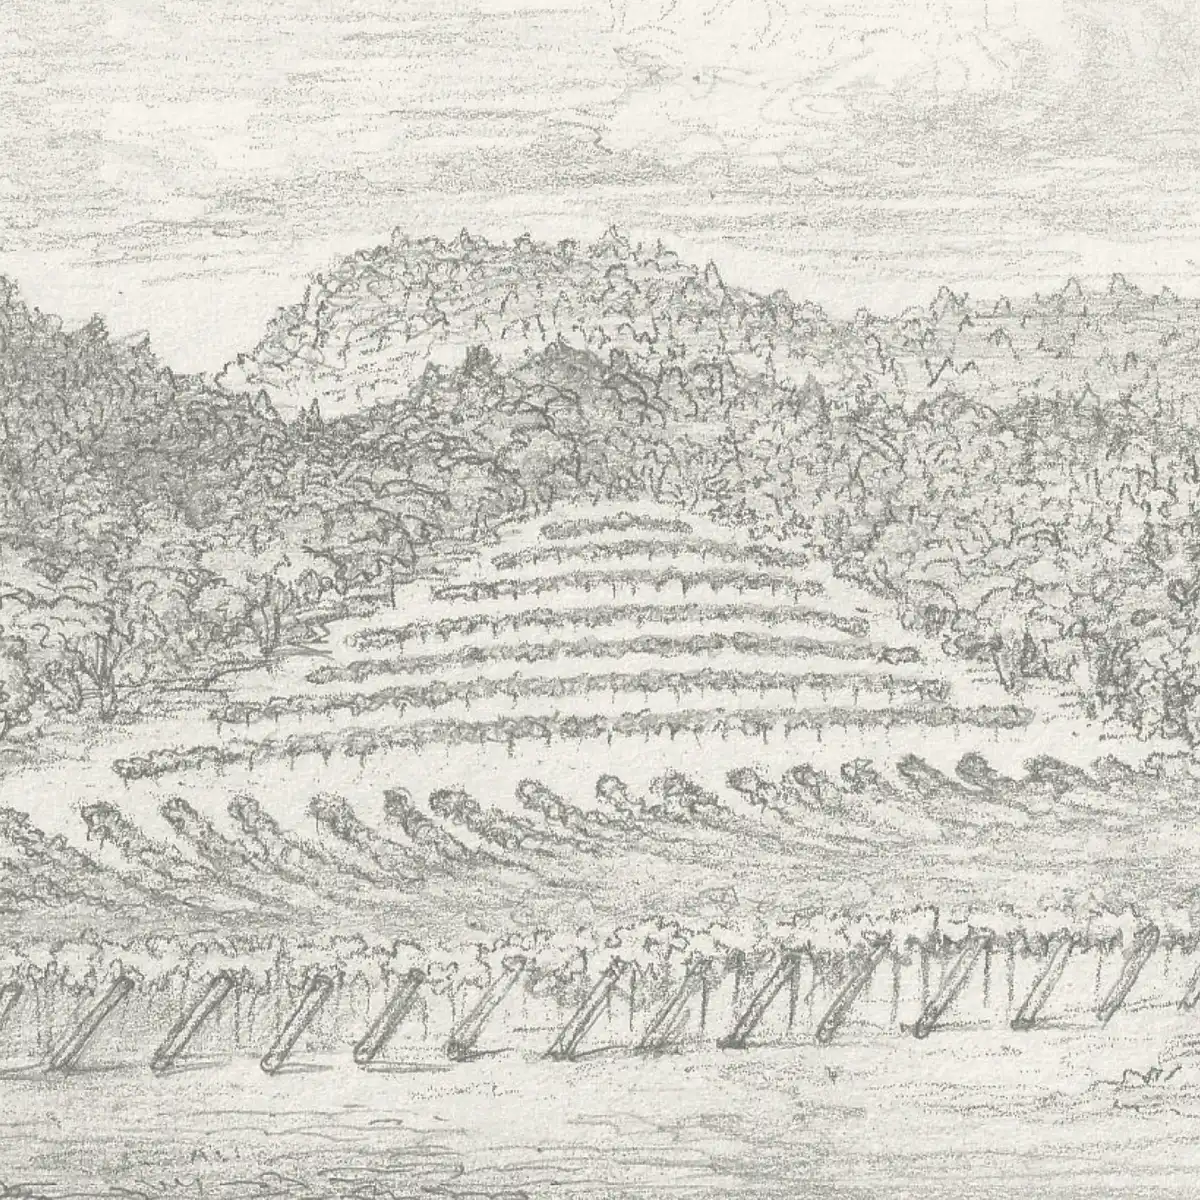 A black and white drawing of a vineyard.